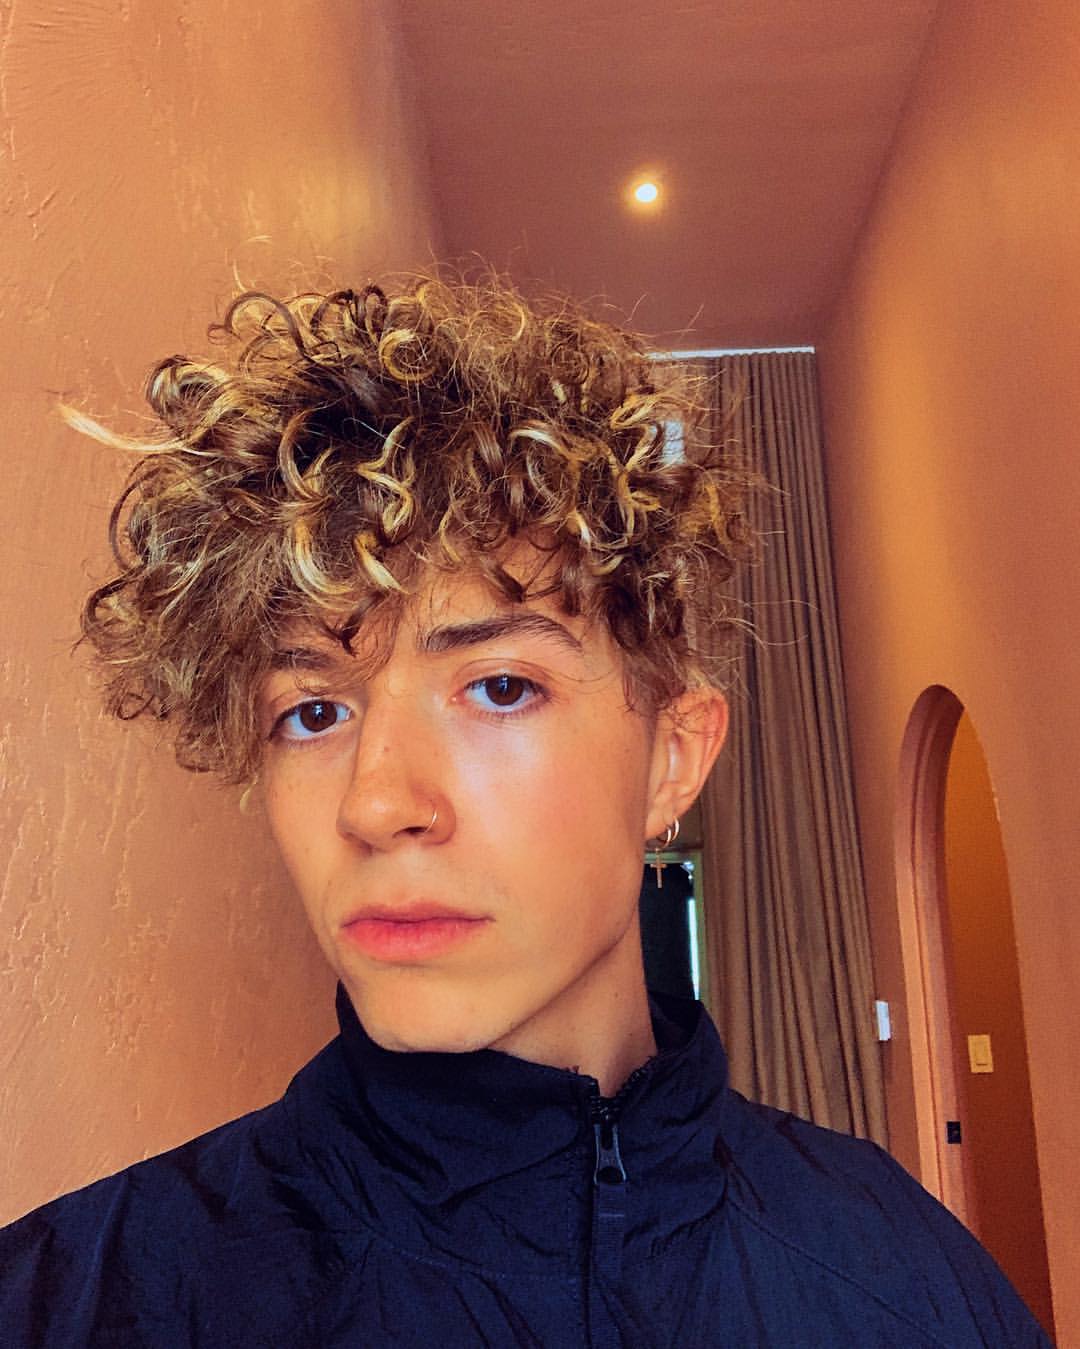 General photo of Jack Avery